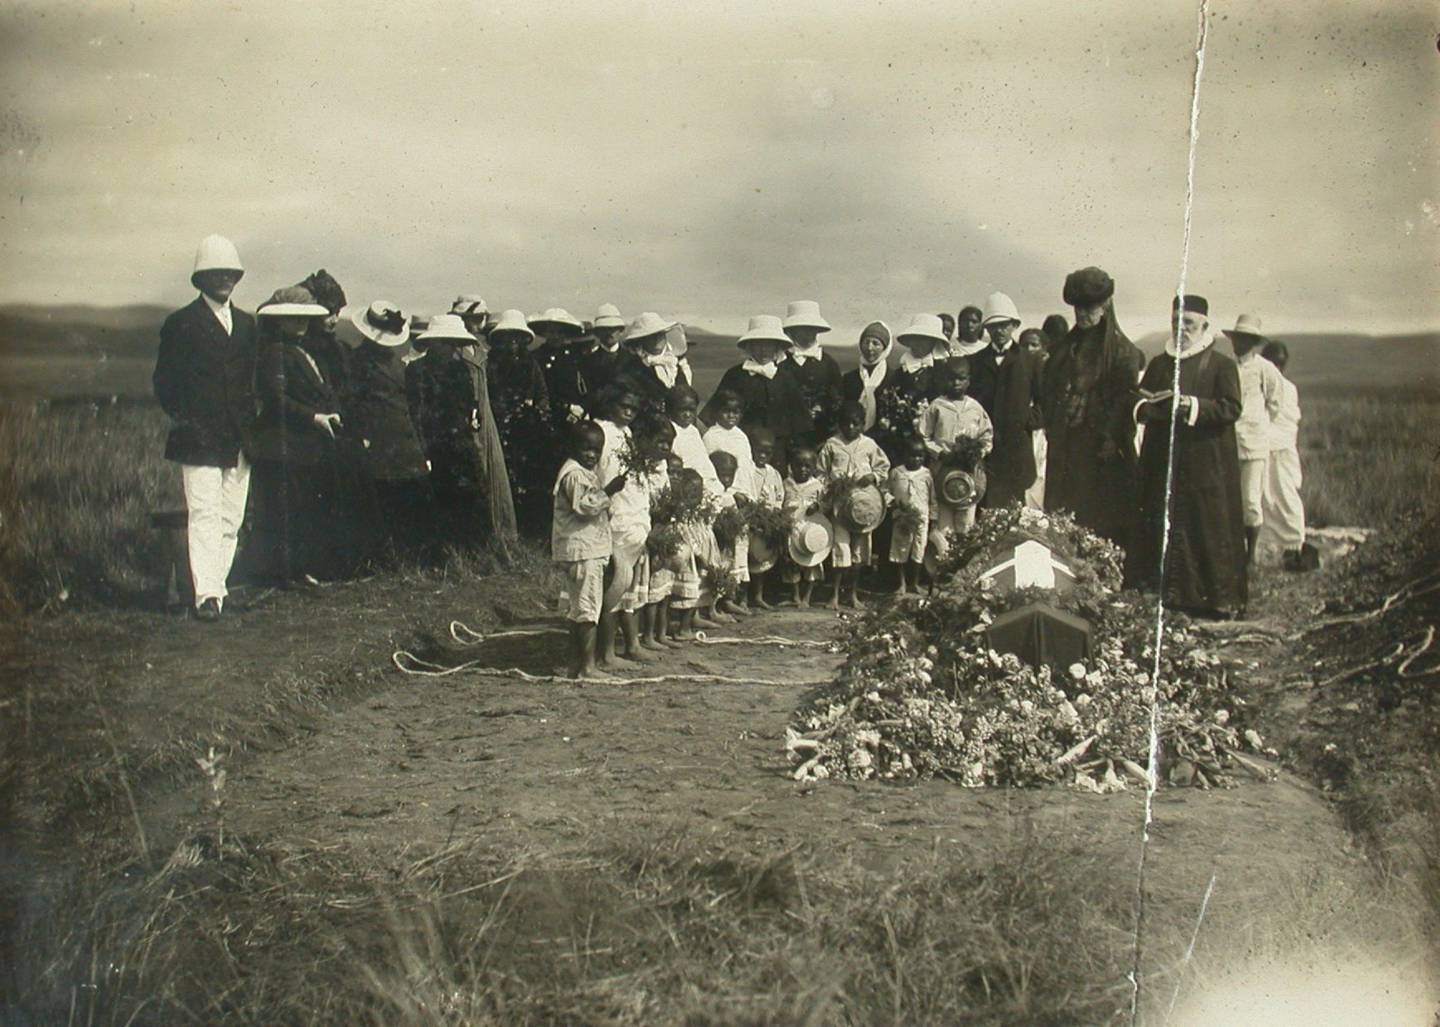 IMP-NMS-A08-1041. "Søster Almas begravelse, Mangarano 6/7 1918" ("Deaconess Alma's funeral, Mangarano July 6, 1918"). Alma Jensen was a missionary in Madagascar from 1910-1918. She died in Antsirabe, Madagascar on July 5, 1918. Pastor Sigvardt Lauritz Wetterstad was a missionary in Madagascar from 1887-1919. He married Constance Amalie, maiden name Jacobsen, in Antsirabe, Madagascar on October 29, 1889. Olaf Stokstad 1876-1957, was a missionary in Madagascar from 1903-1921. He died in Oslo, Norway on November 2, 1957. He married Helene Christiane 1877-1960, maiden name Holm, in Farafangana, Madagascar on July 6, 1905. She died in Oslo, Norway on December 16, 1960.